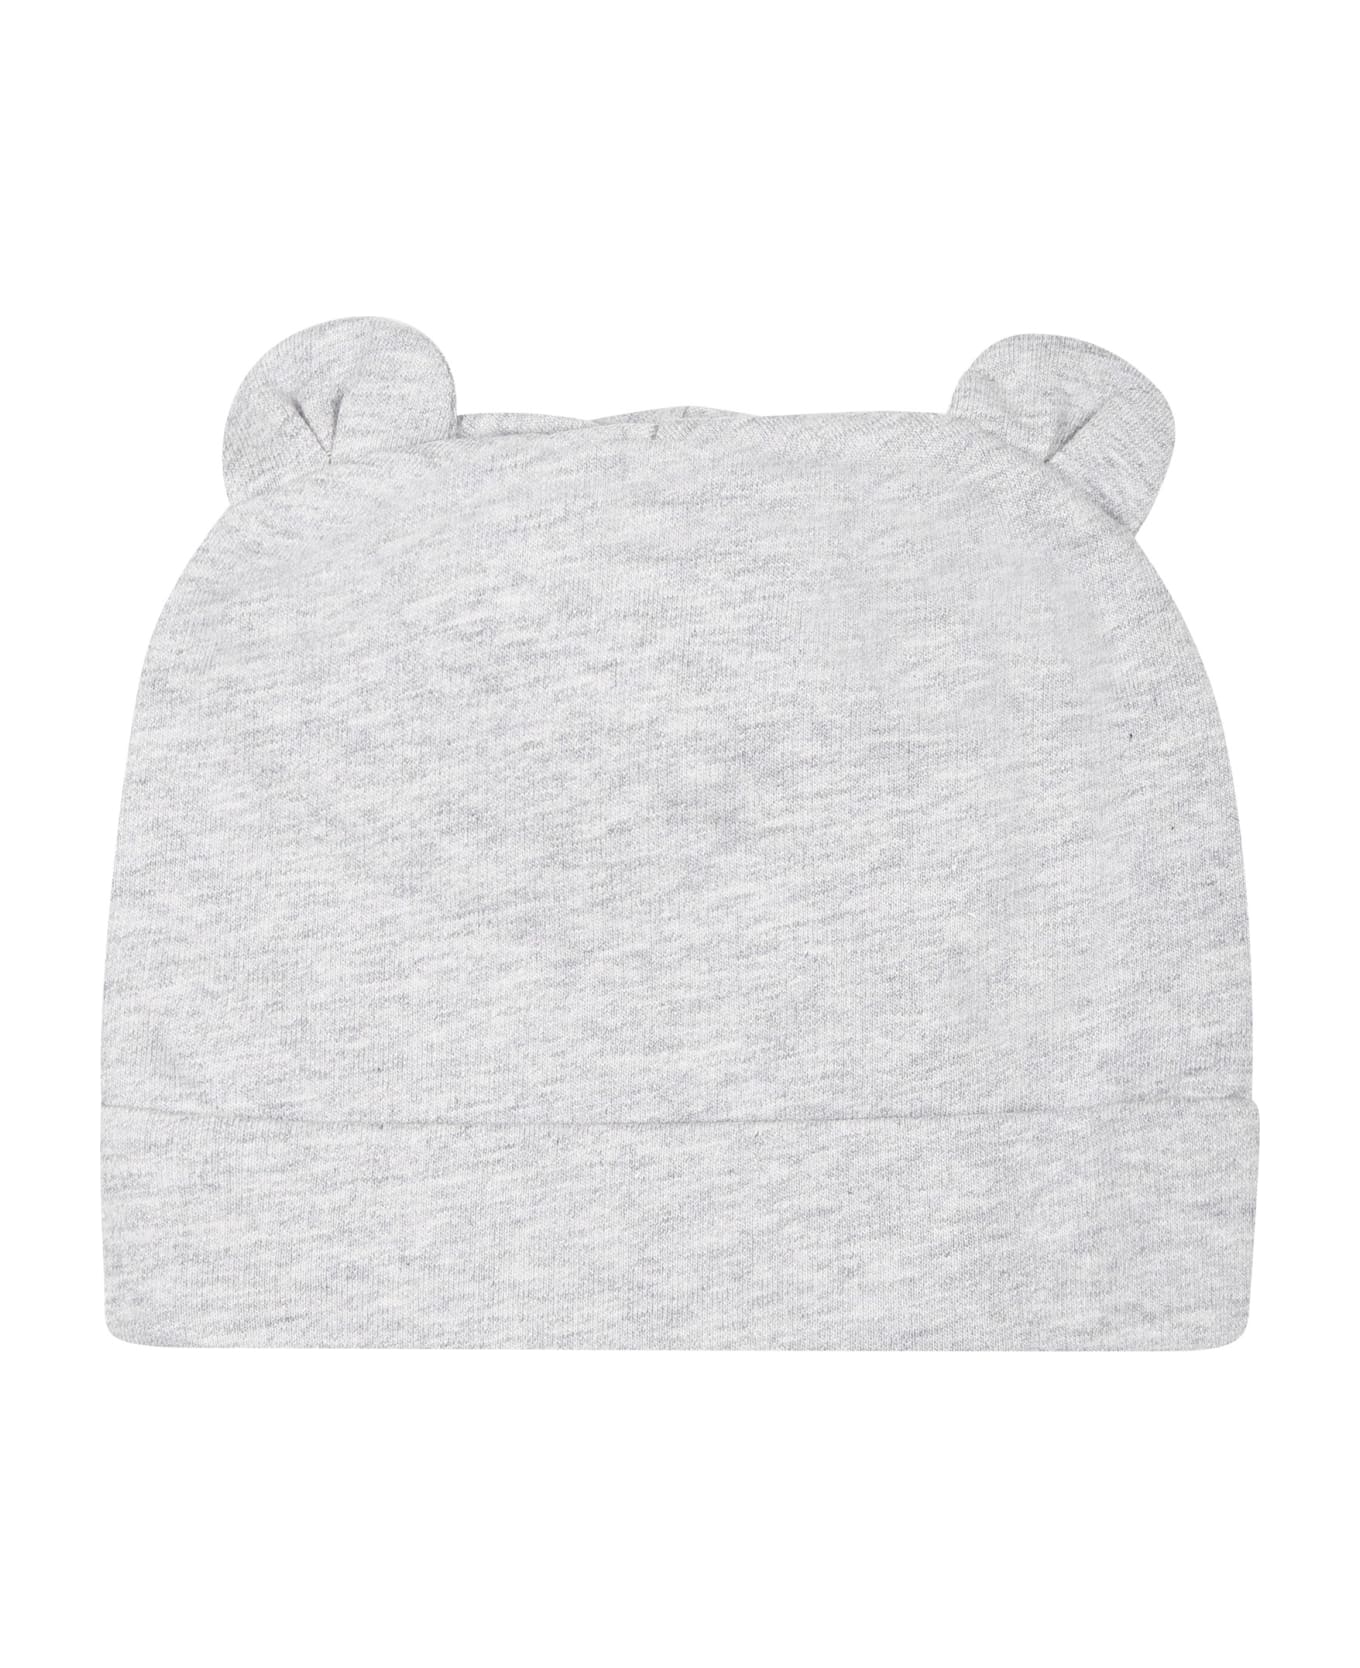 Moschino Grey Set For Babykids With Teddy Bear And Logo - Grey アクセサリー＆ギフト